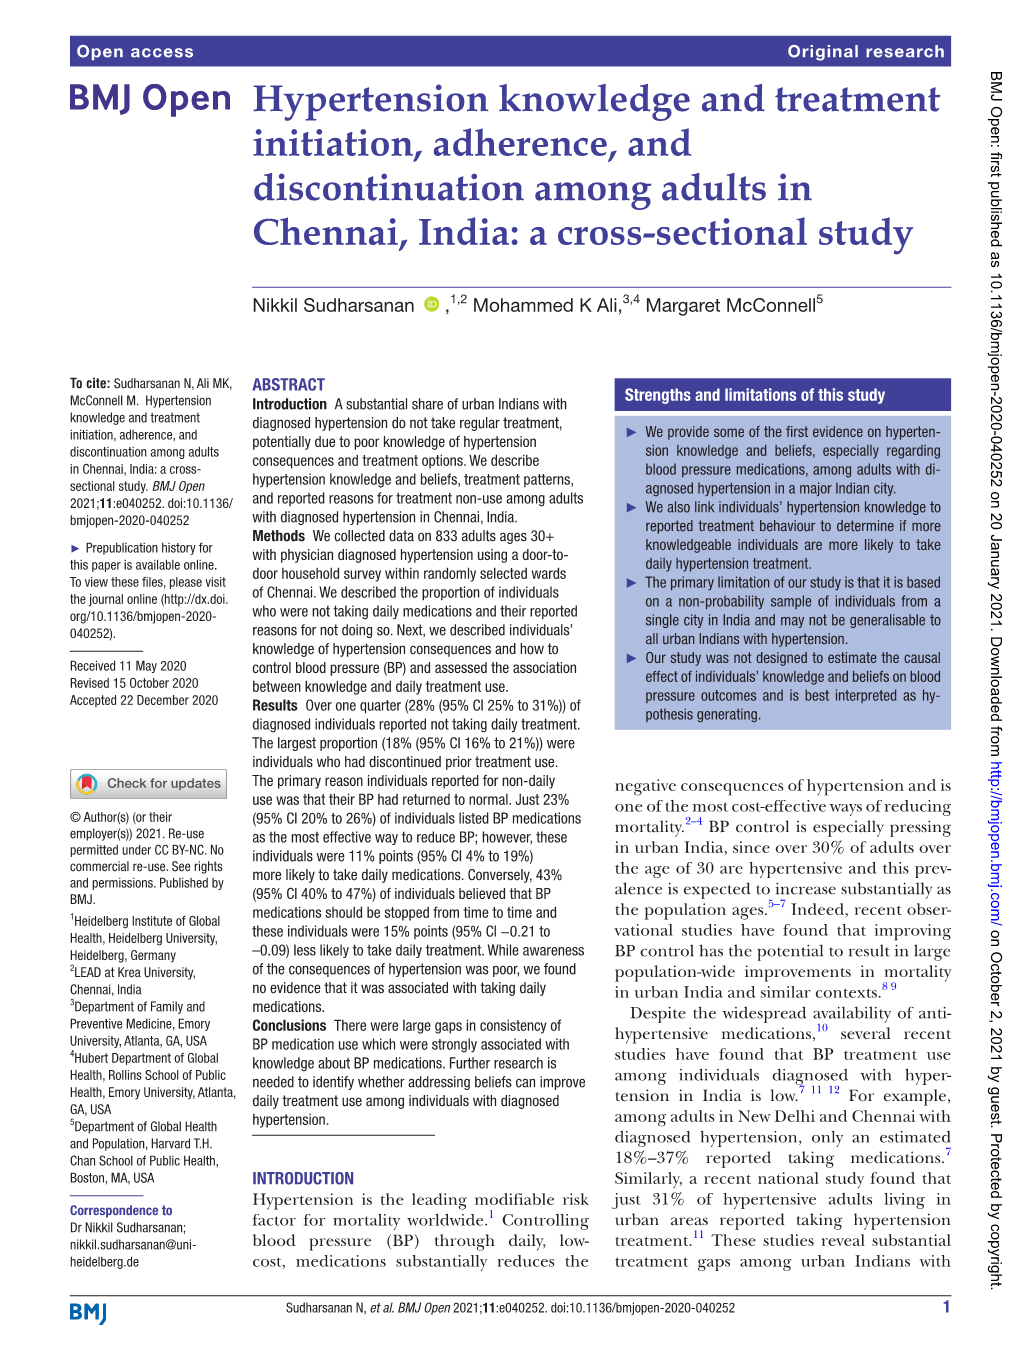 Hypertension Knowledge and Treatment Initiation, Adherence, and Discontinuation Among Adults in Chennai, India: a Cross-Sectional­ Study